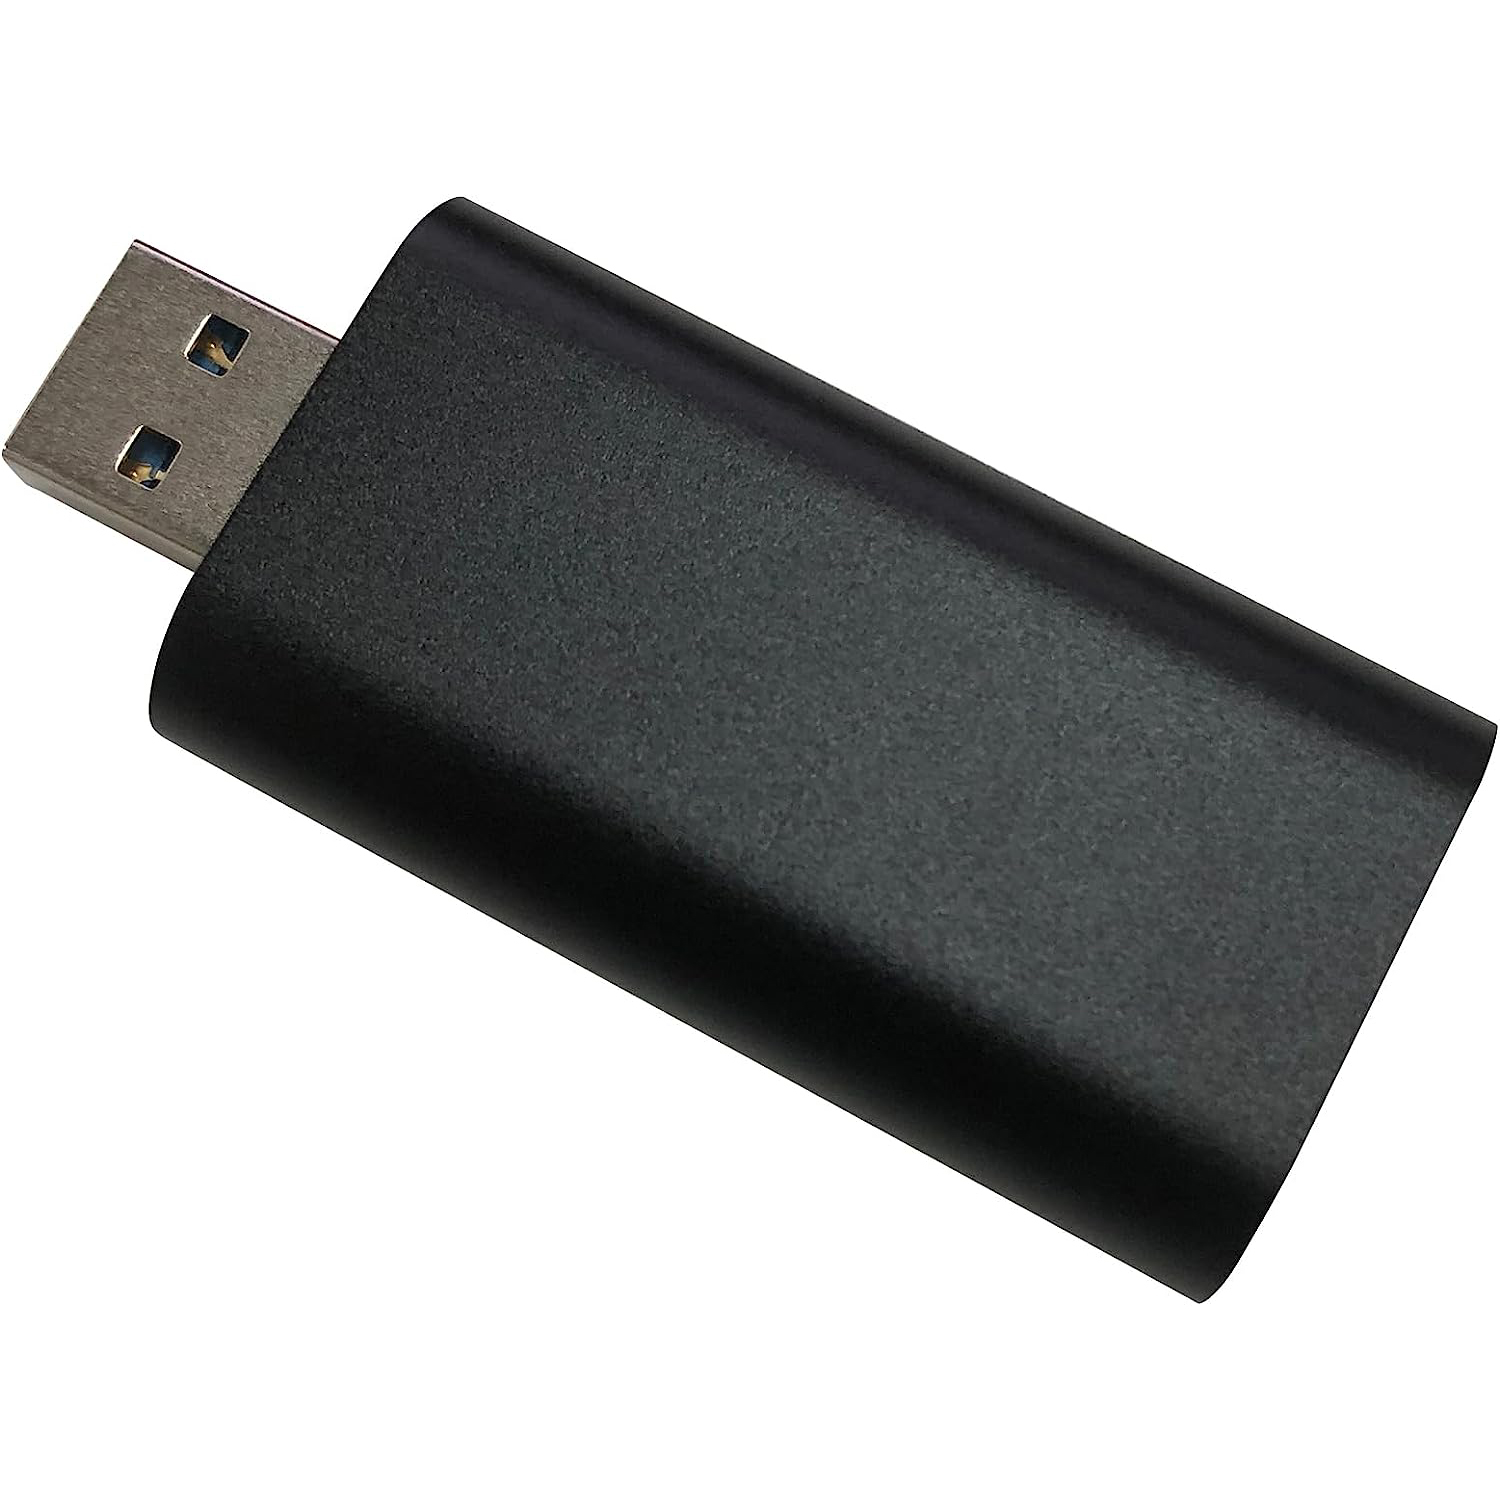 10 Best Capture Card Usb for 2023